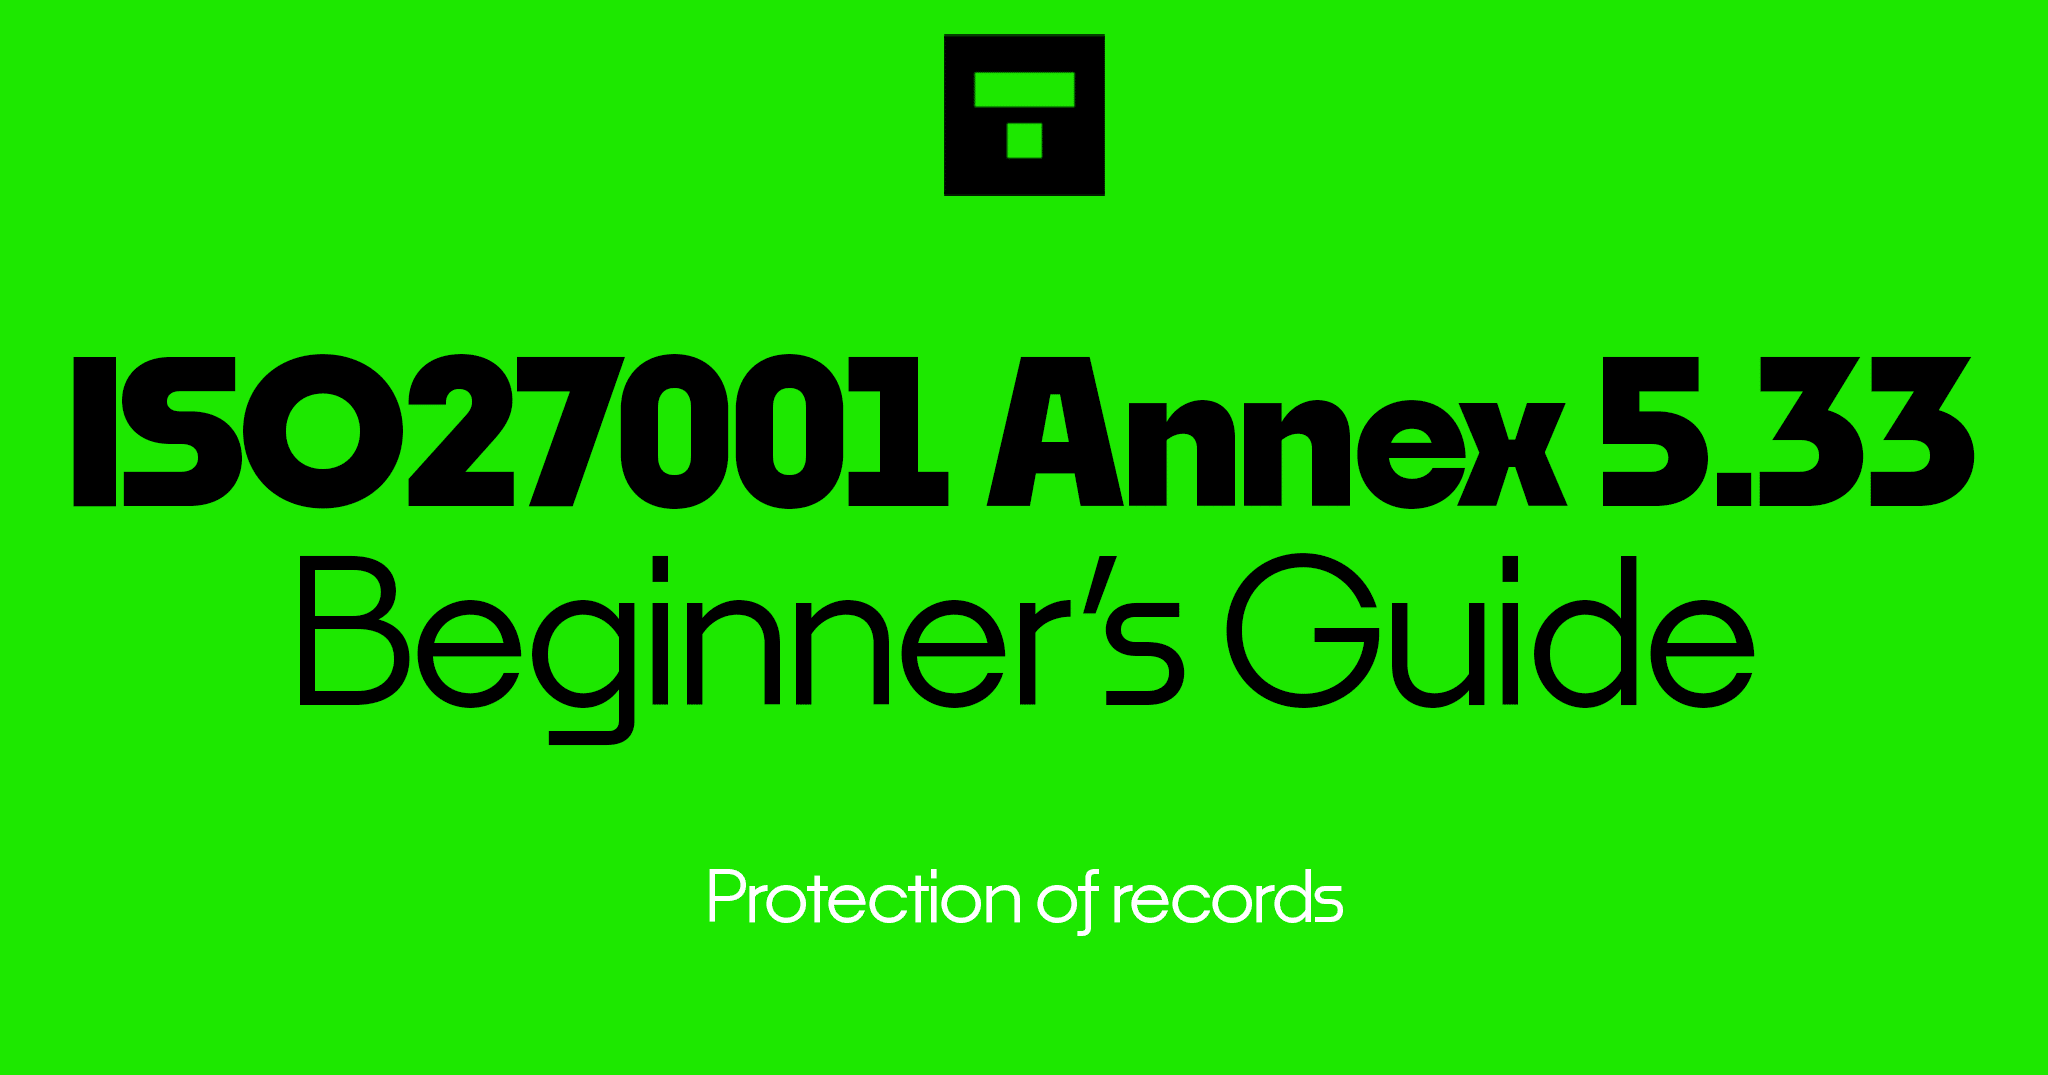 How To Implement ISO 27001 Annex A 5.33 Protection Of Records